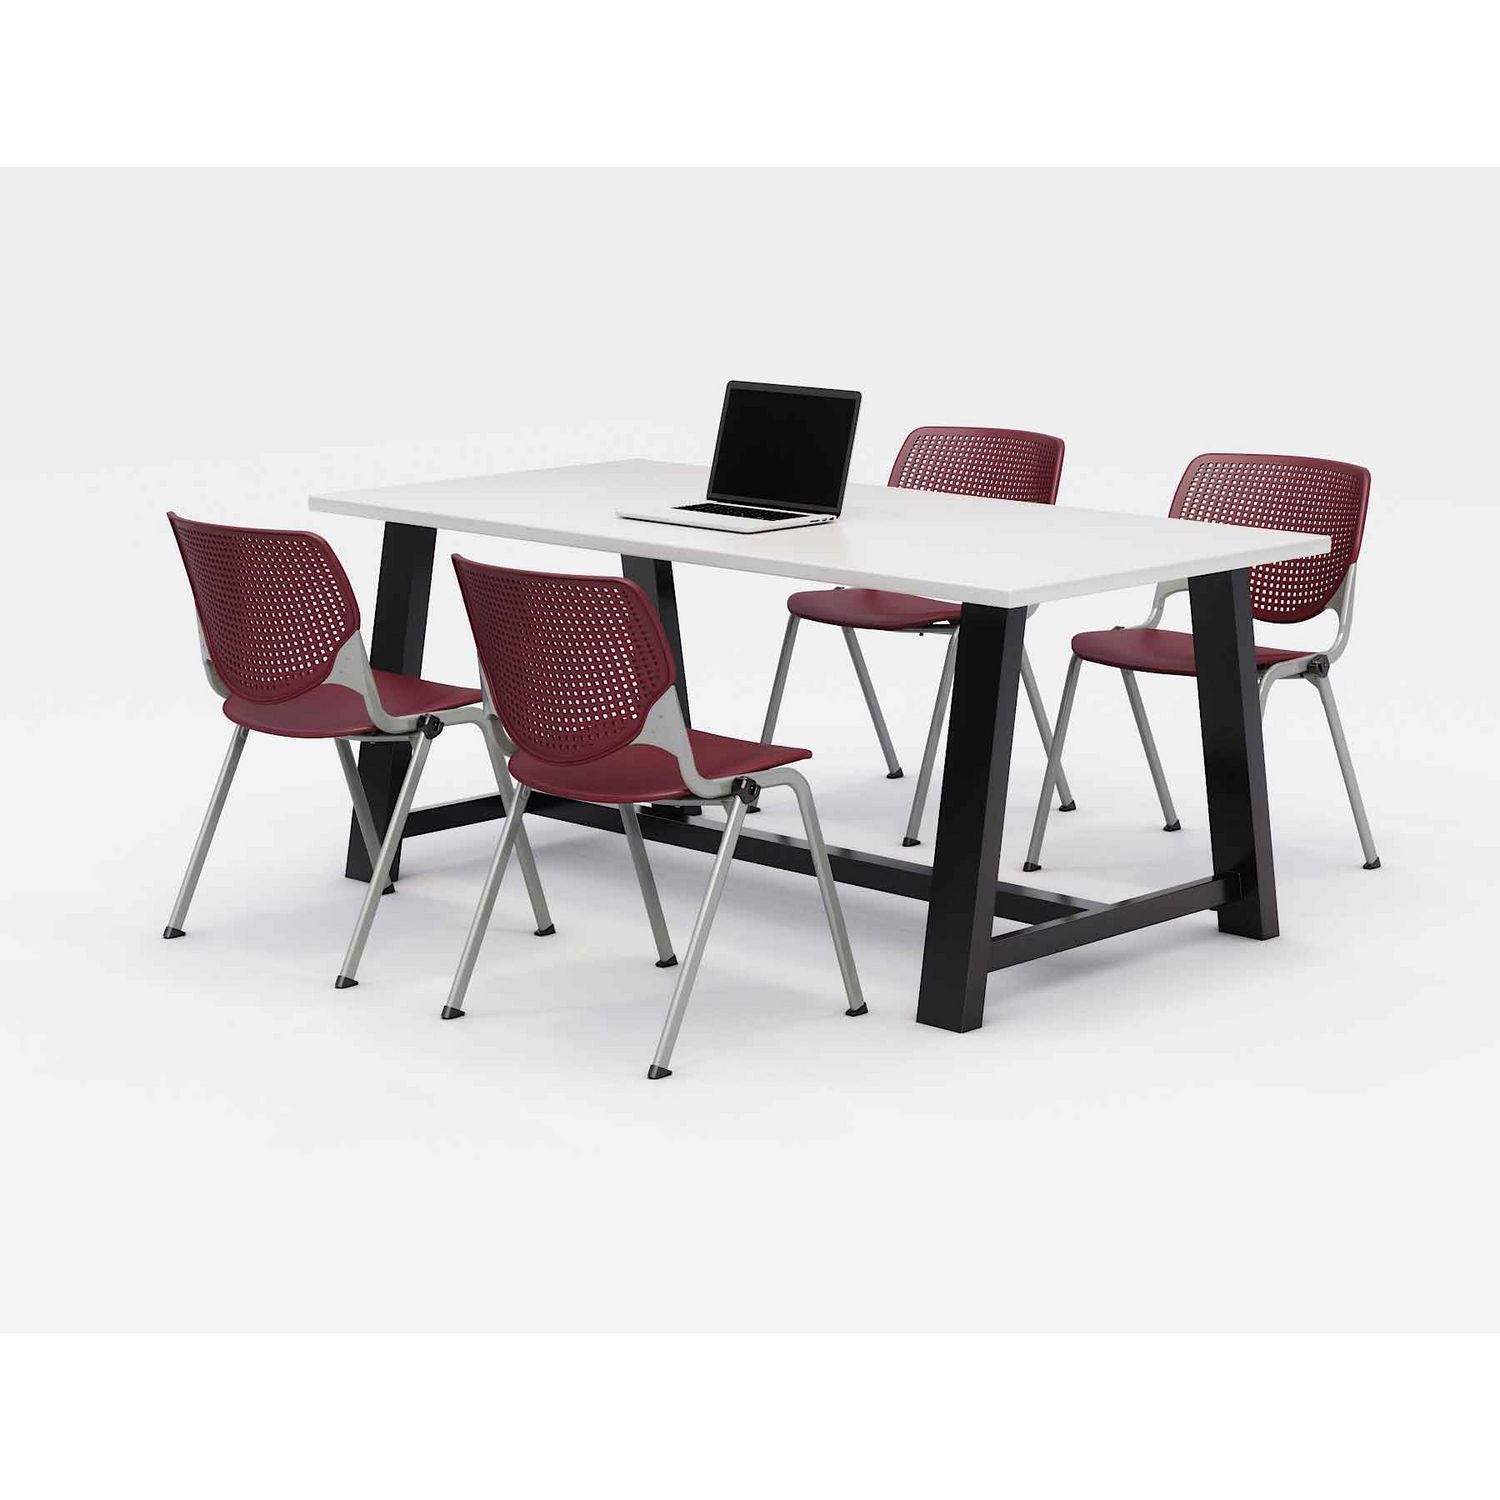 midtown-dining-table-with-four-burgundy-kool-series-chairs-36-x-72-x-30-designer-white-ships-in-4-6-business-days_kfi840031900258 - 1